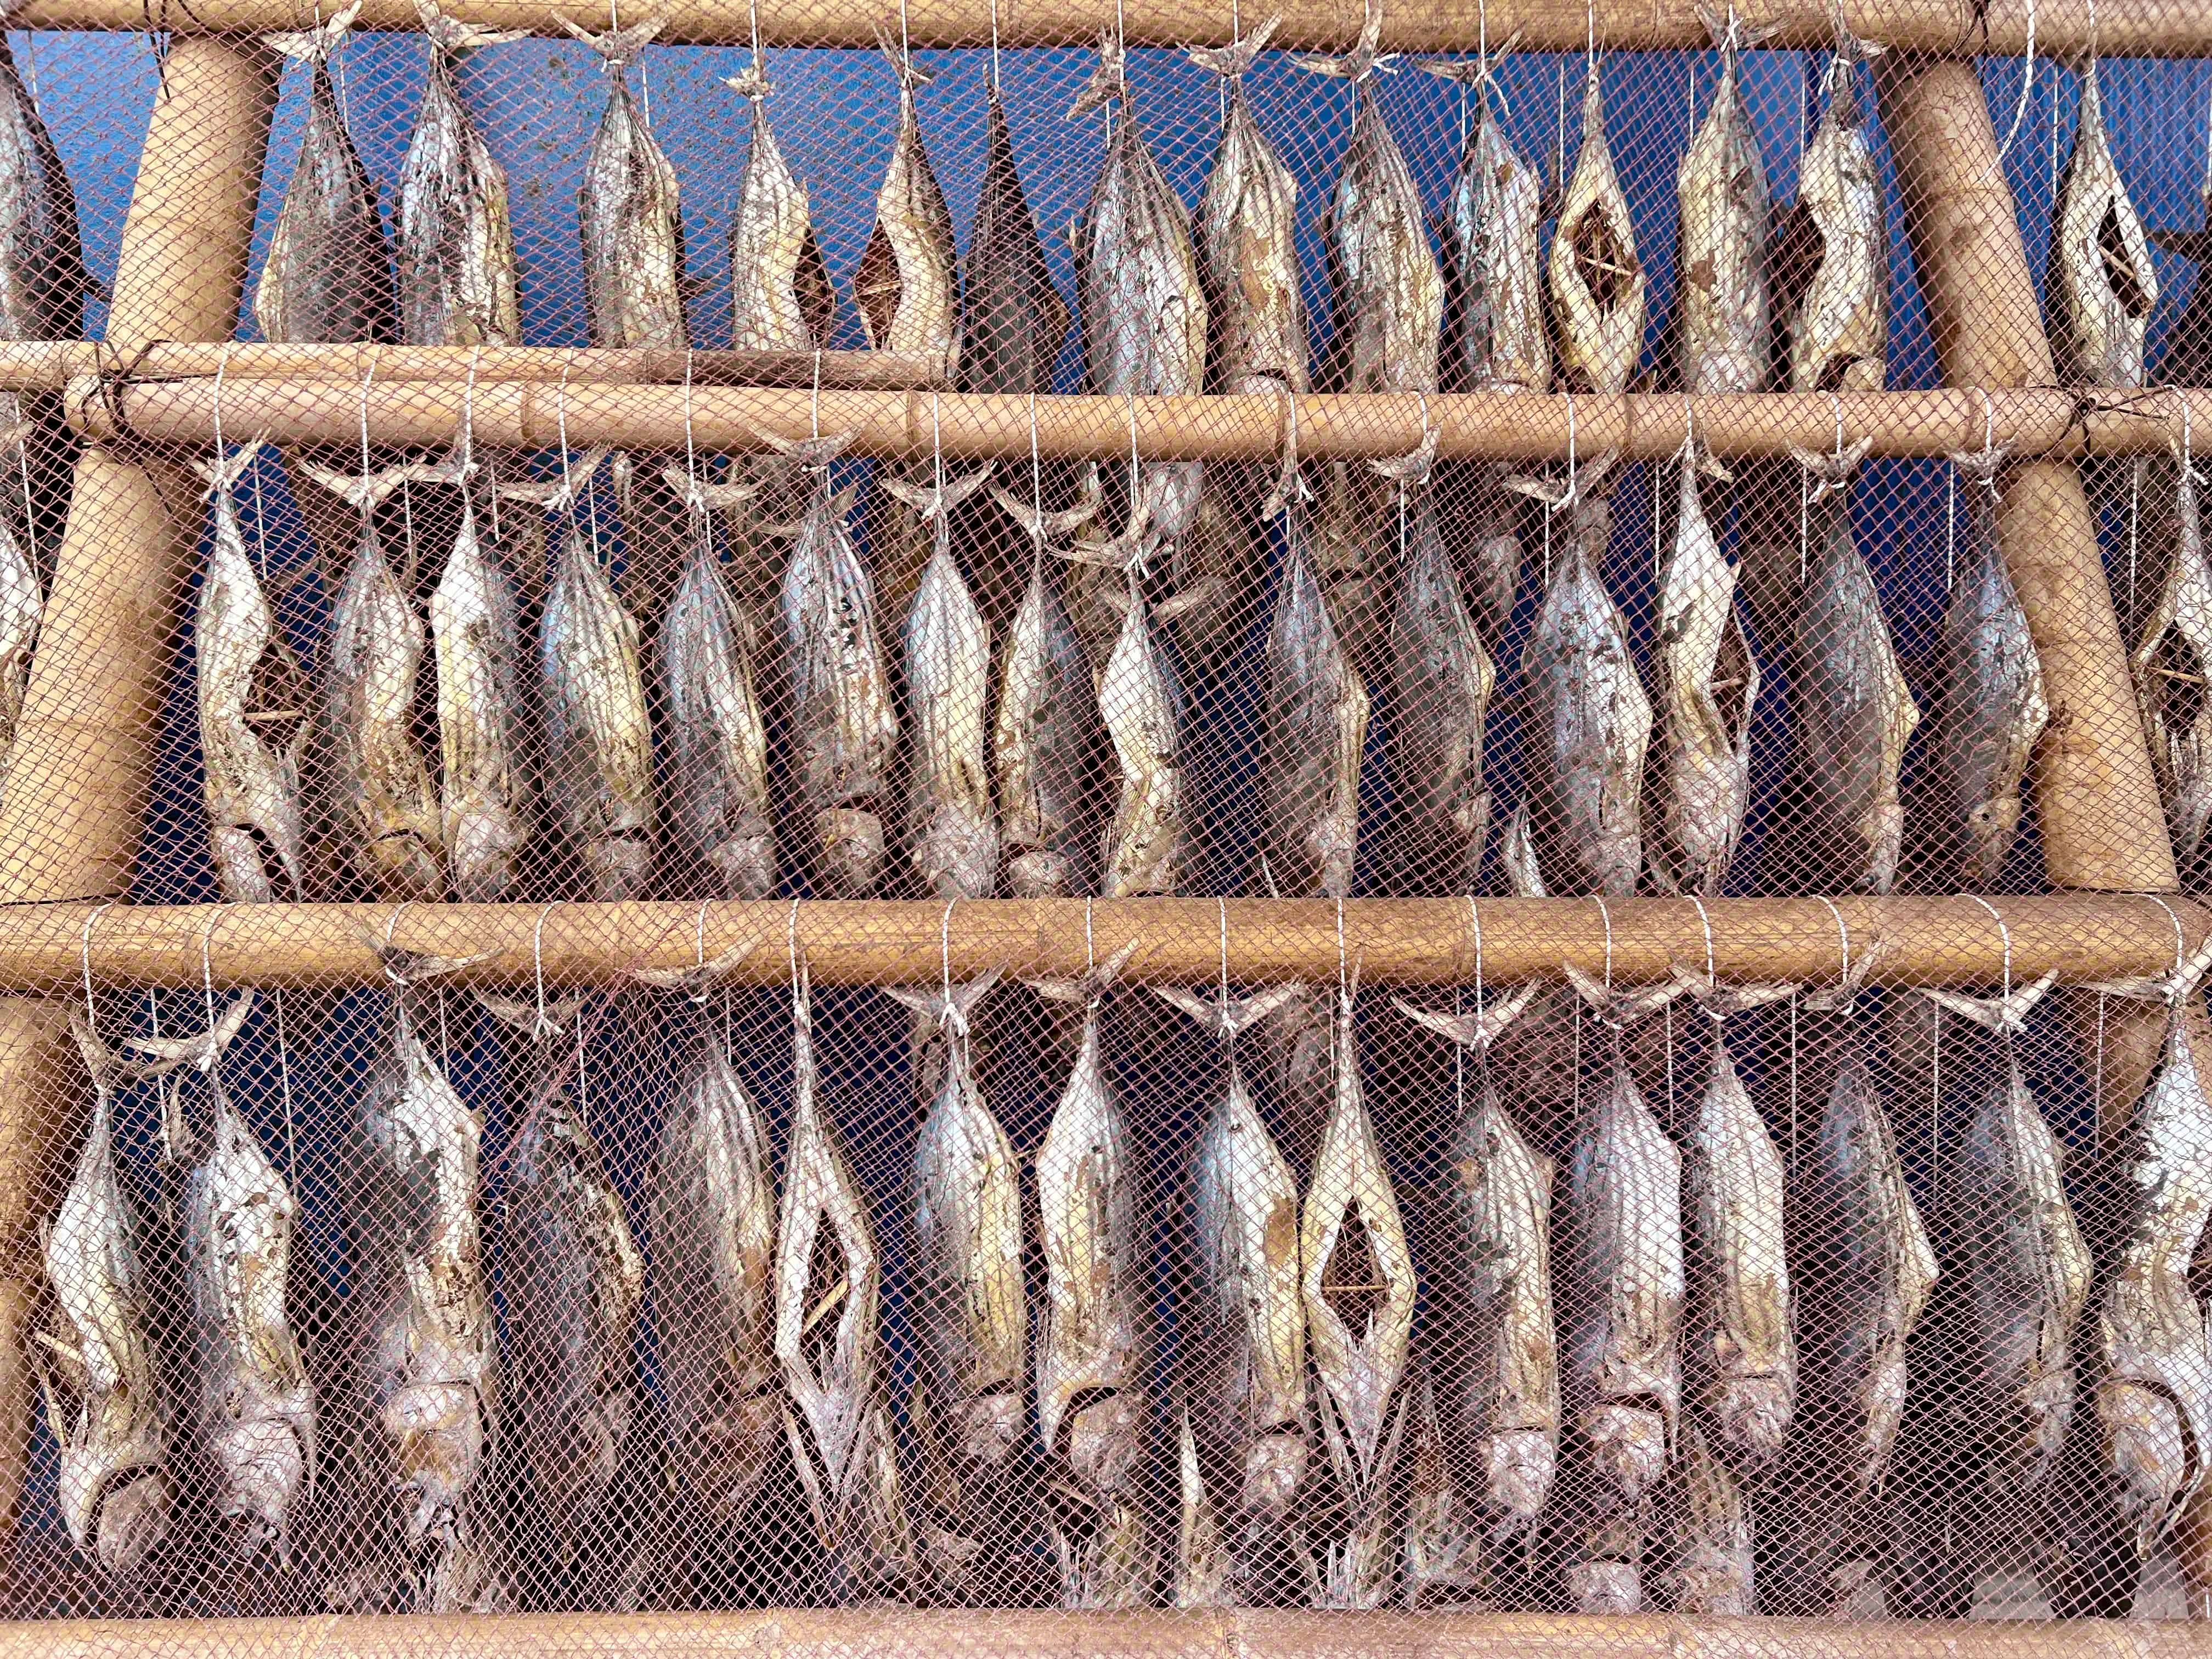 Rows of fish hanging from wooden poles behind a net.